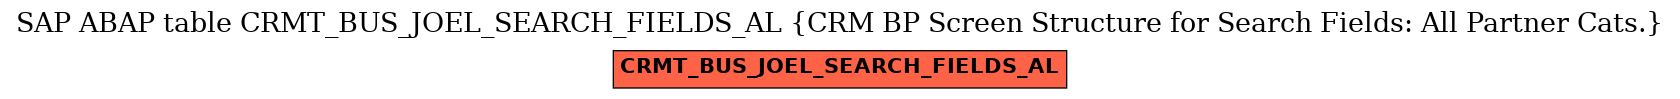 E-R Diagram for table CRMT_BUS_JOEL_SEARCH_FIELDS_AL (CRM BP Screen Structure for Search Fields: All Partner Cats.)